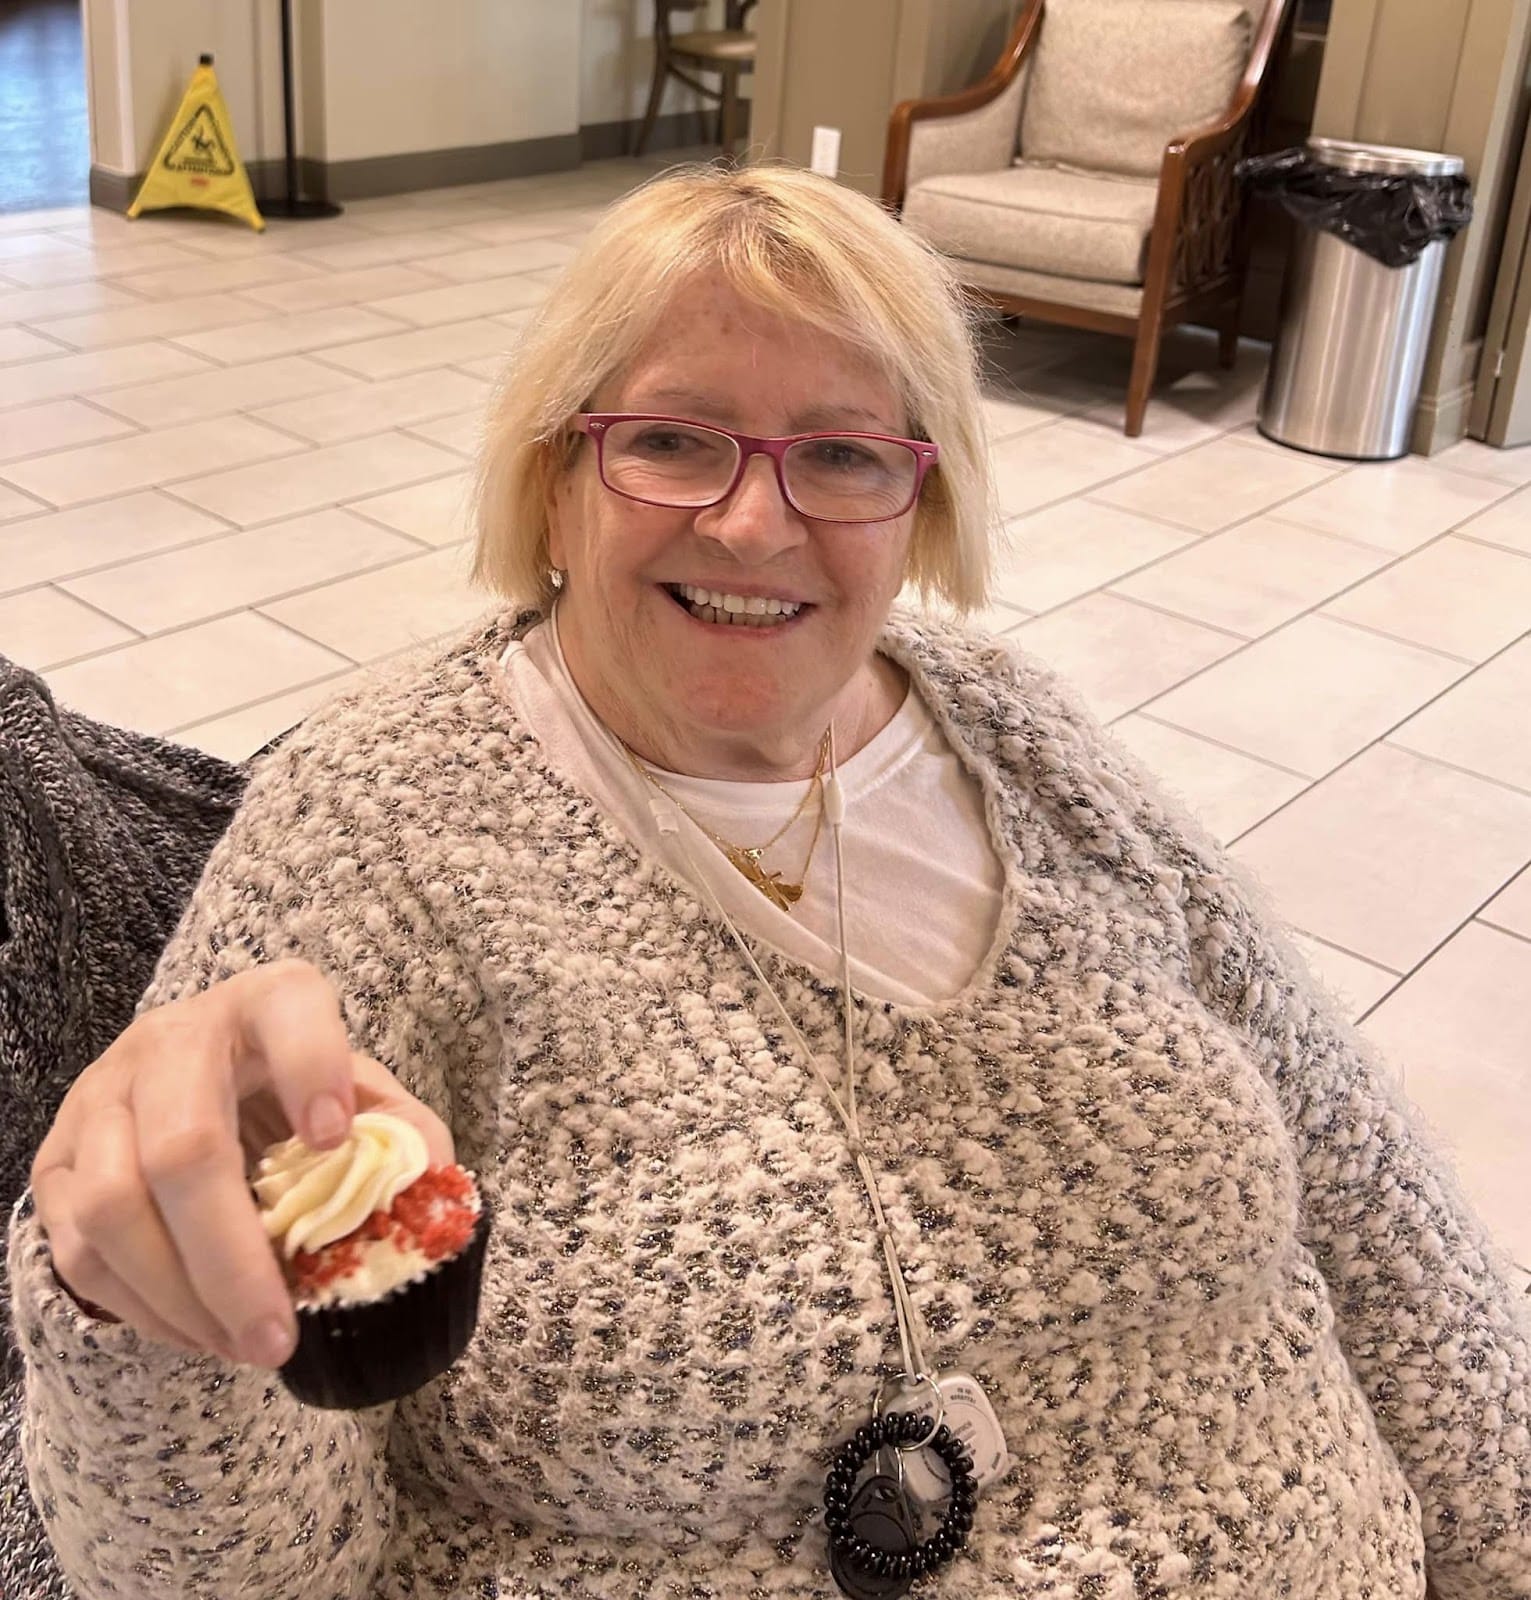 An elderly senior holding a cupcake and smiling